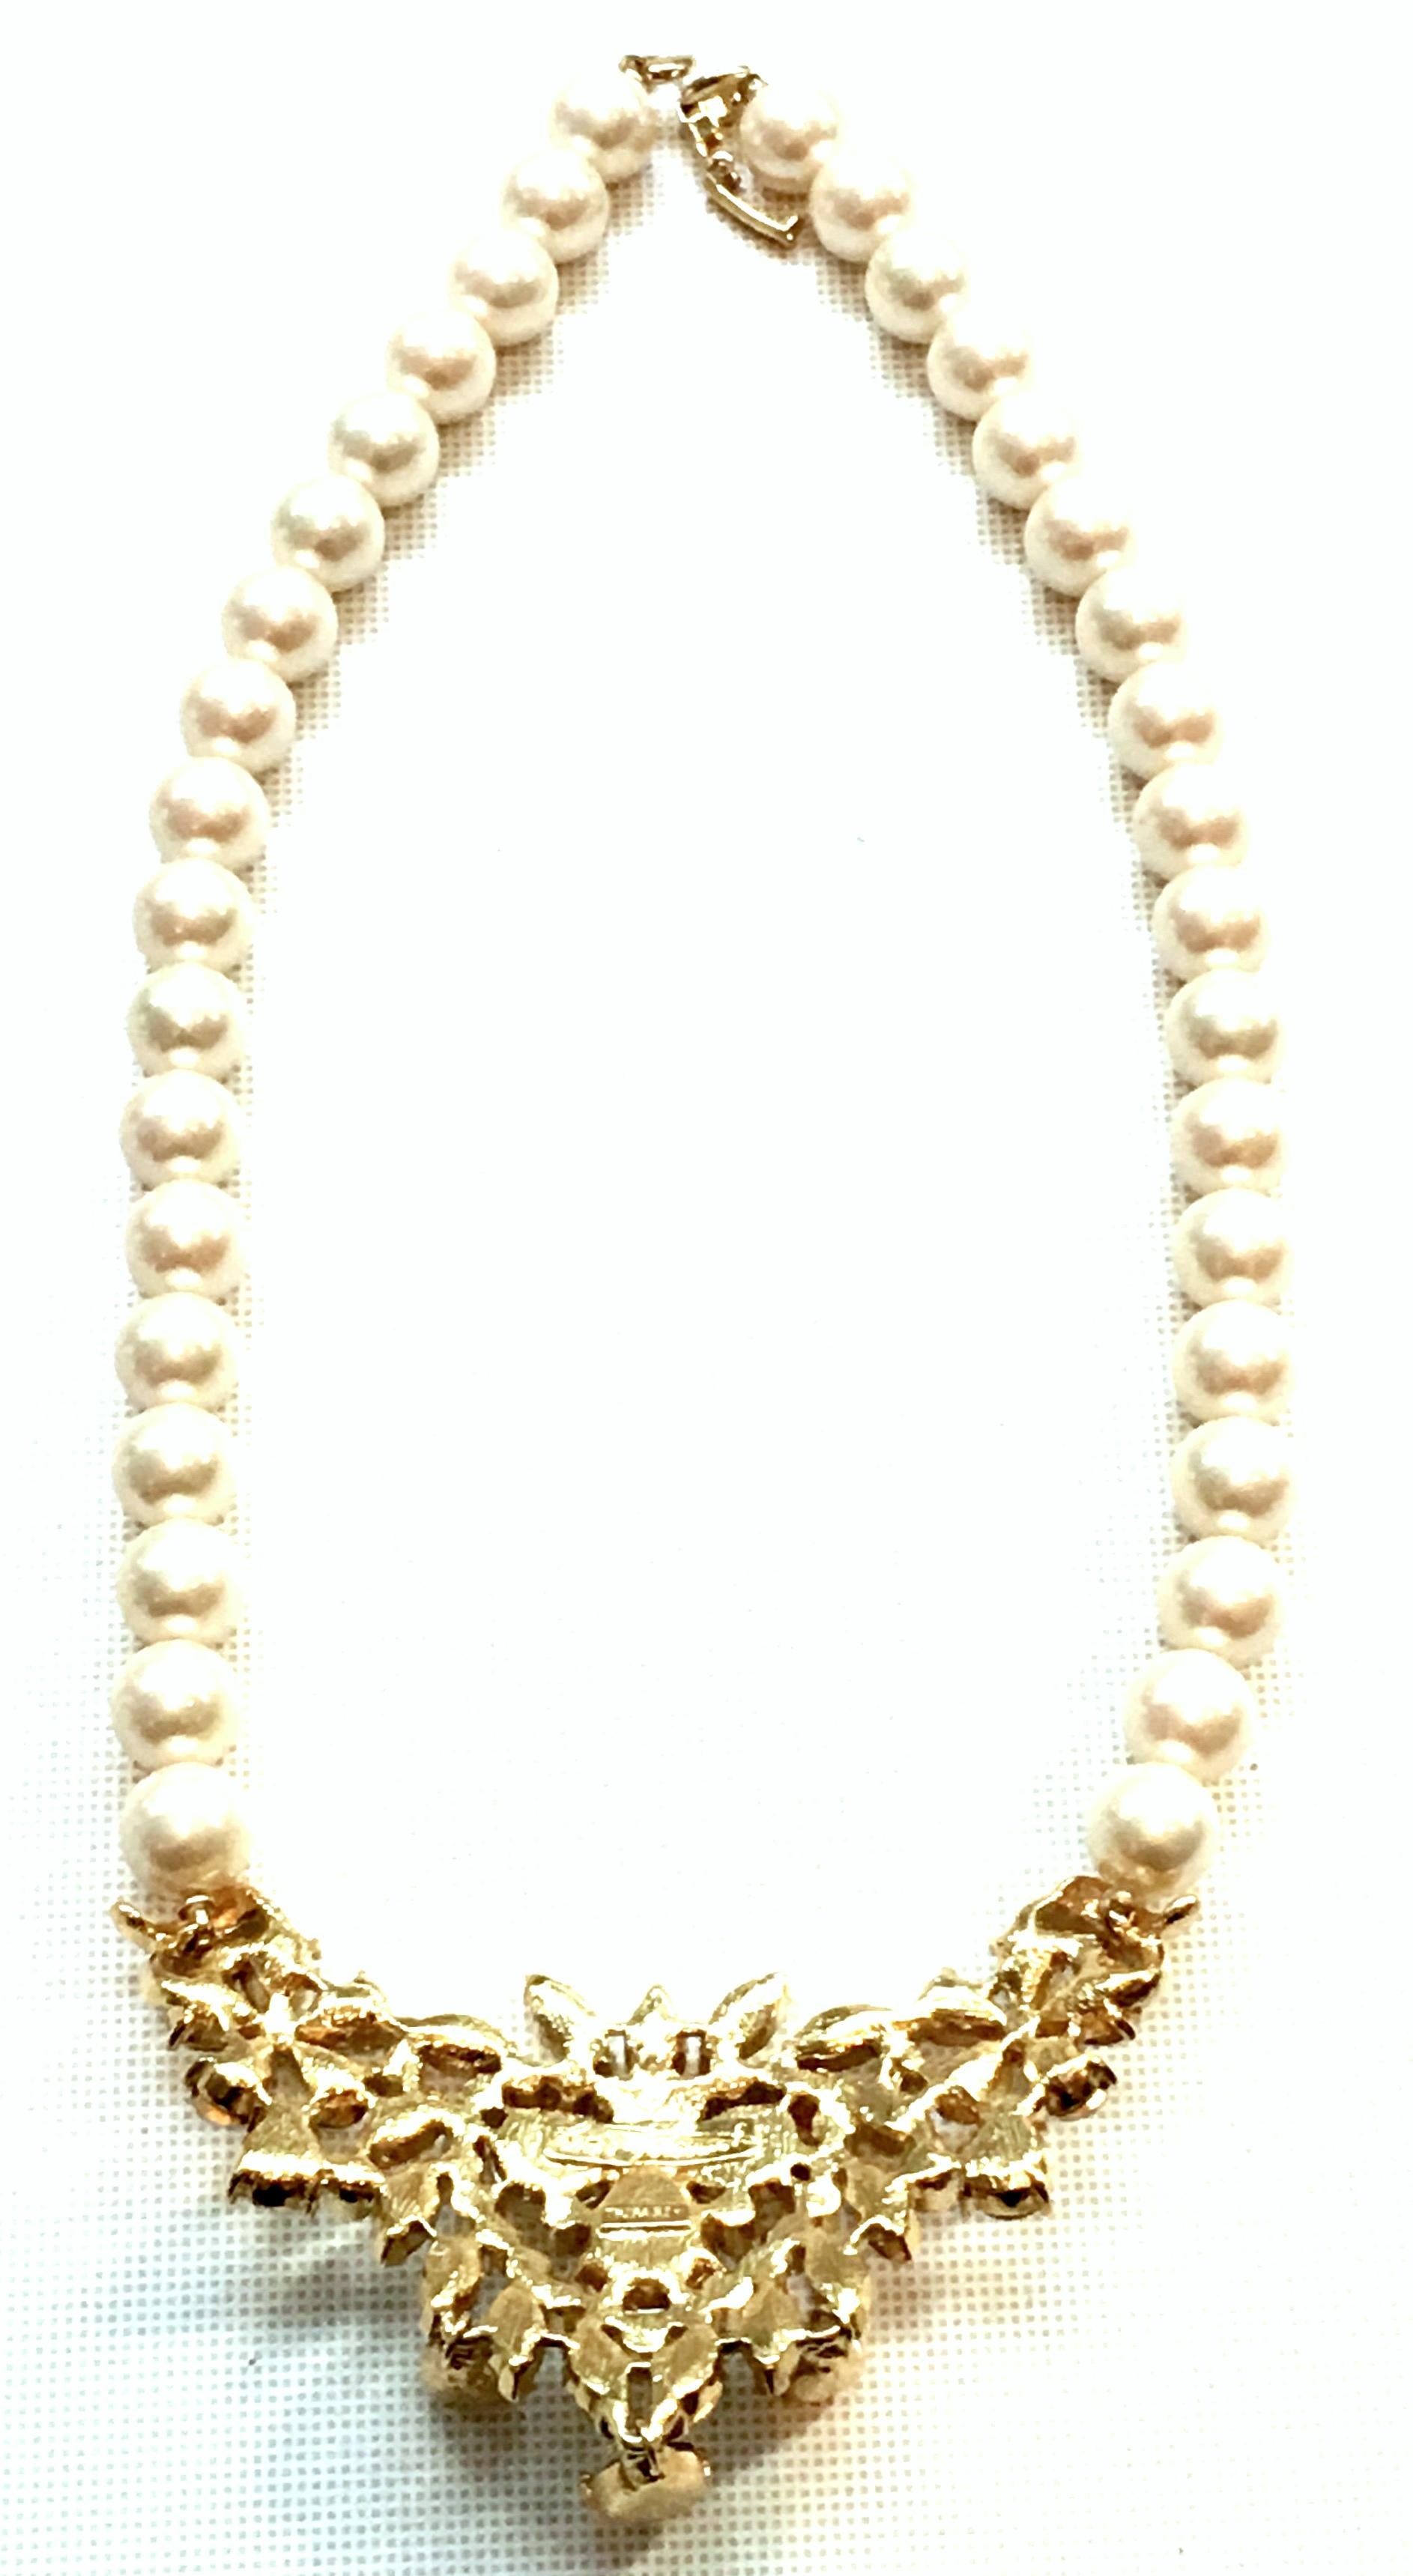 20th Century Gold Austrian Crystal & Pearl Necklace By Matsumoto For Trifari 6